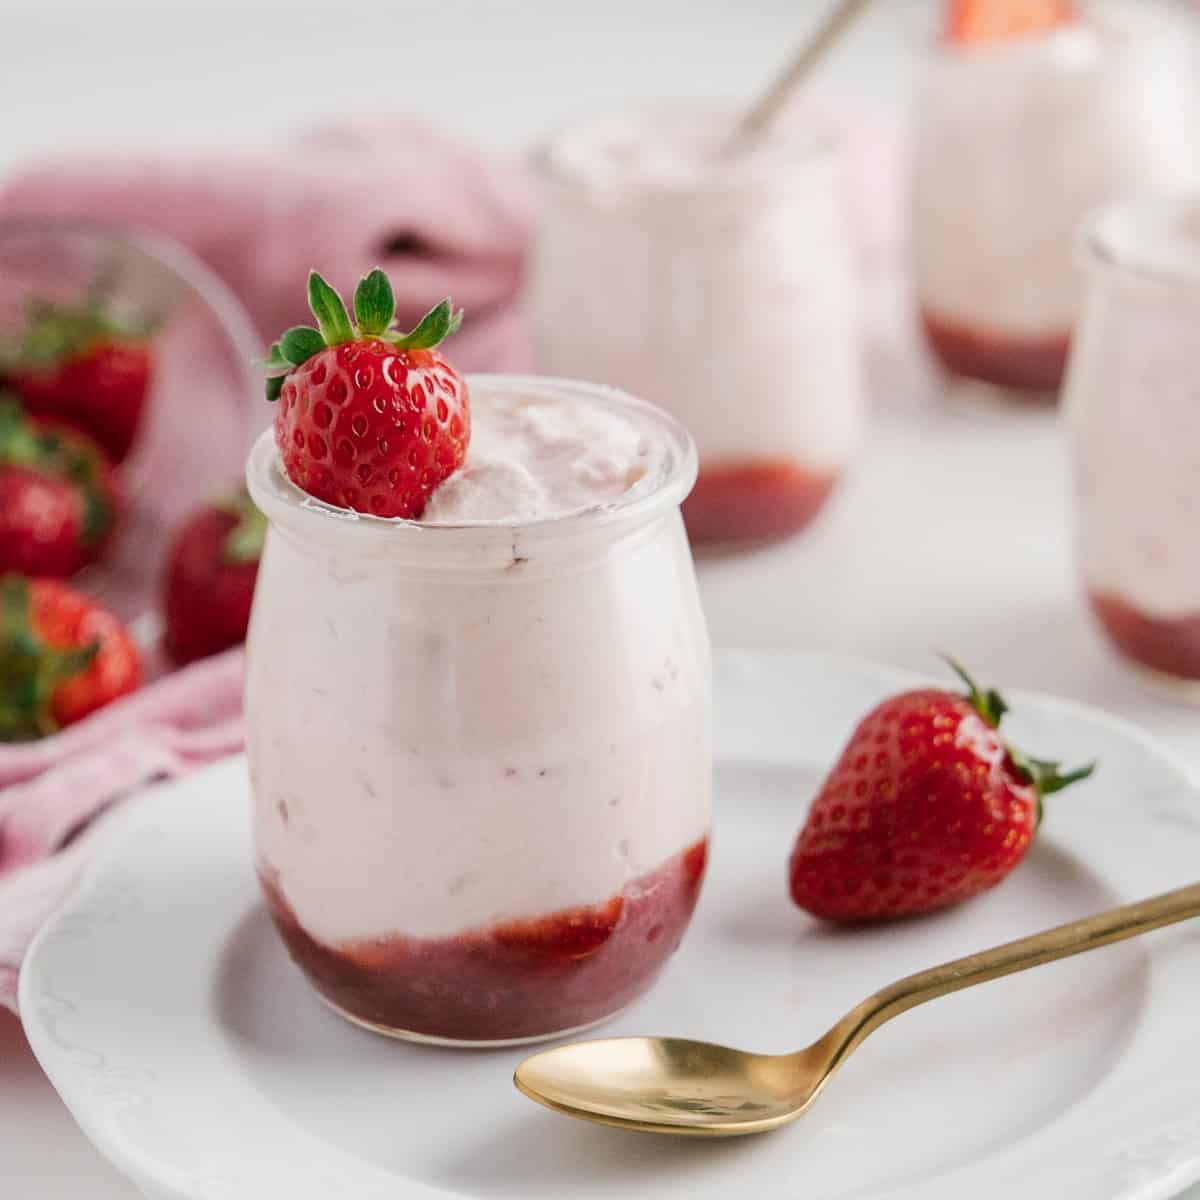 Strawberry Mousse in a jar on a plate with a spoon